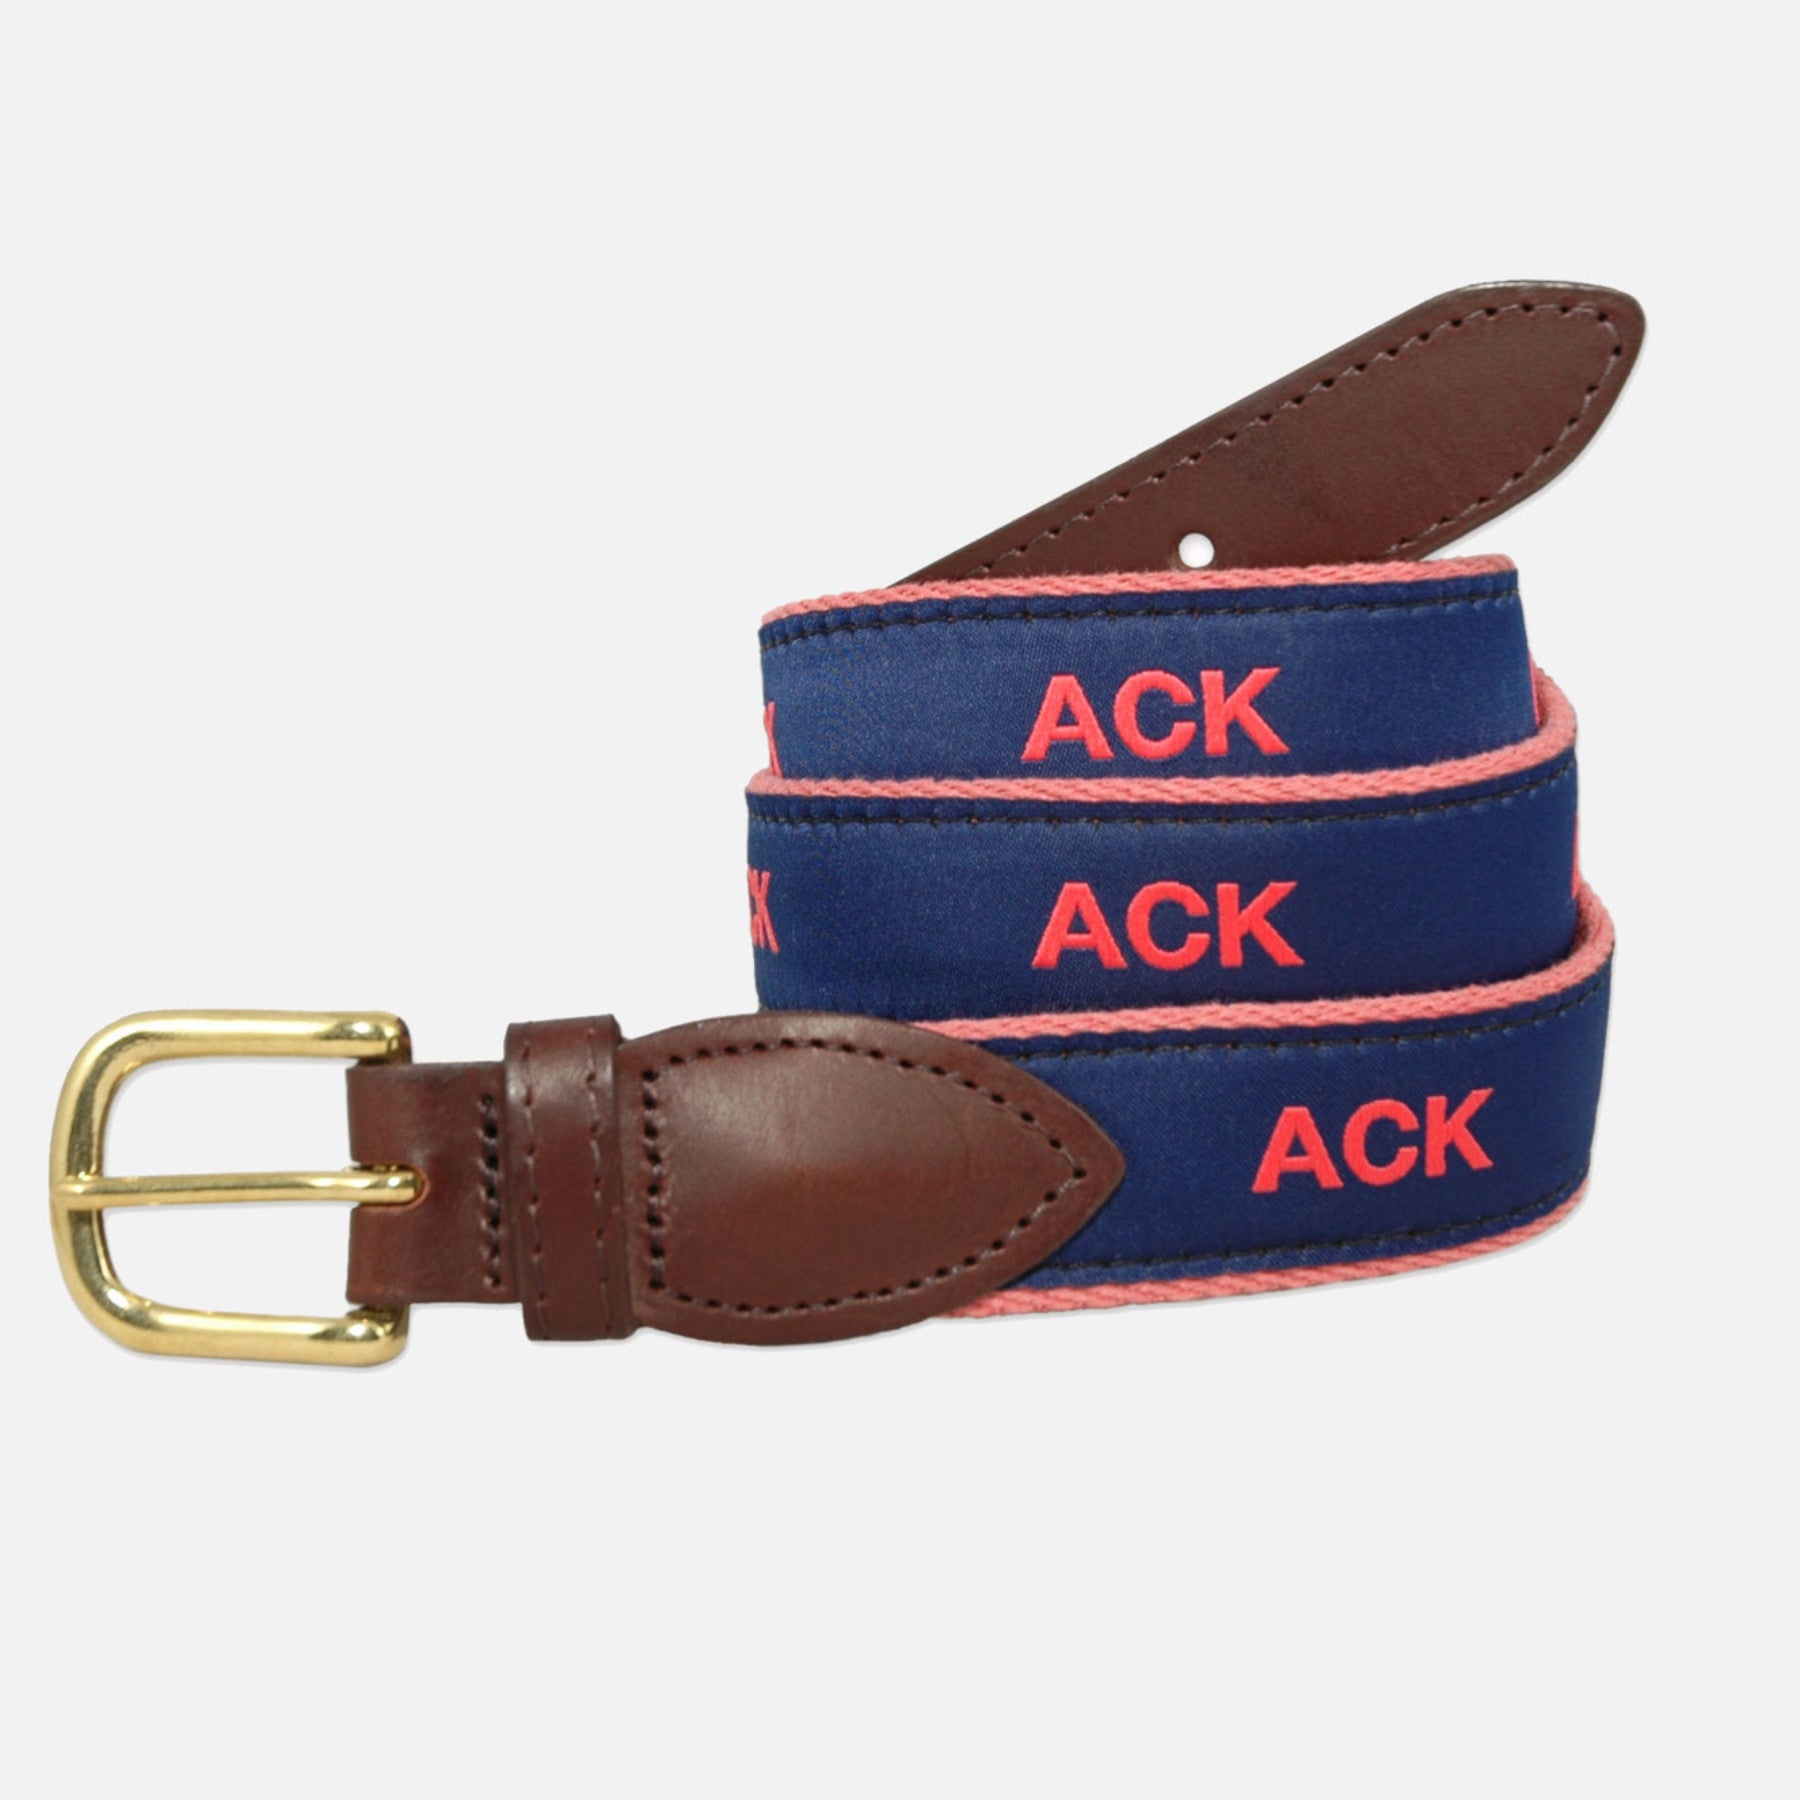 YRI Men's Ribbon Belt - Red ACK on Red Webbing - Murray's Toggery Shop